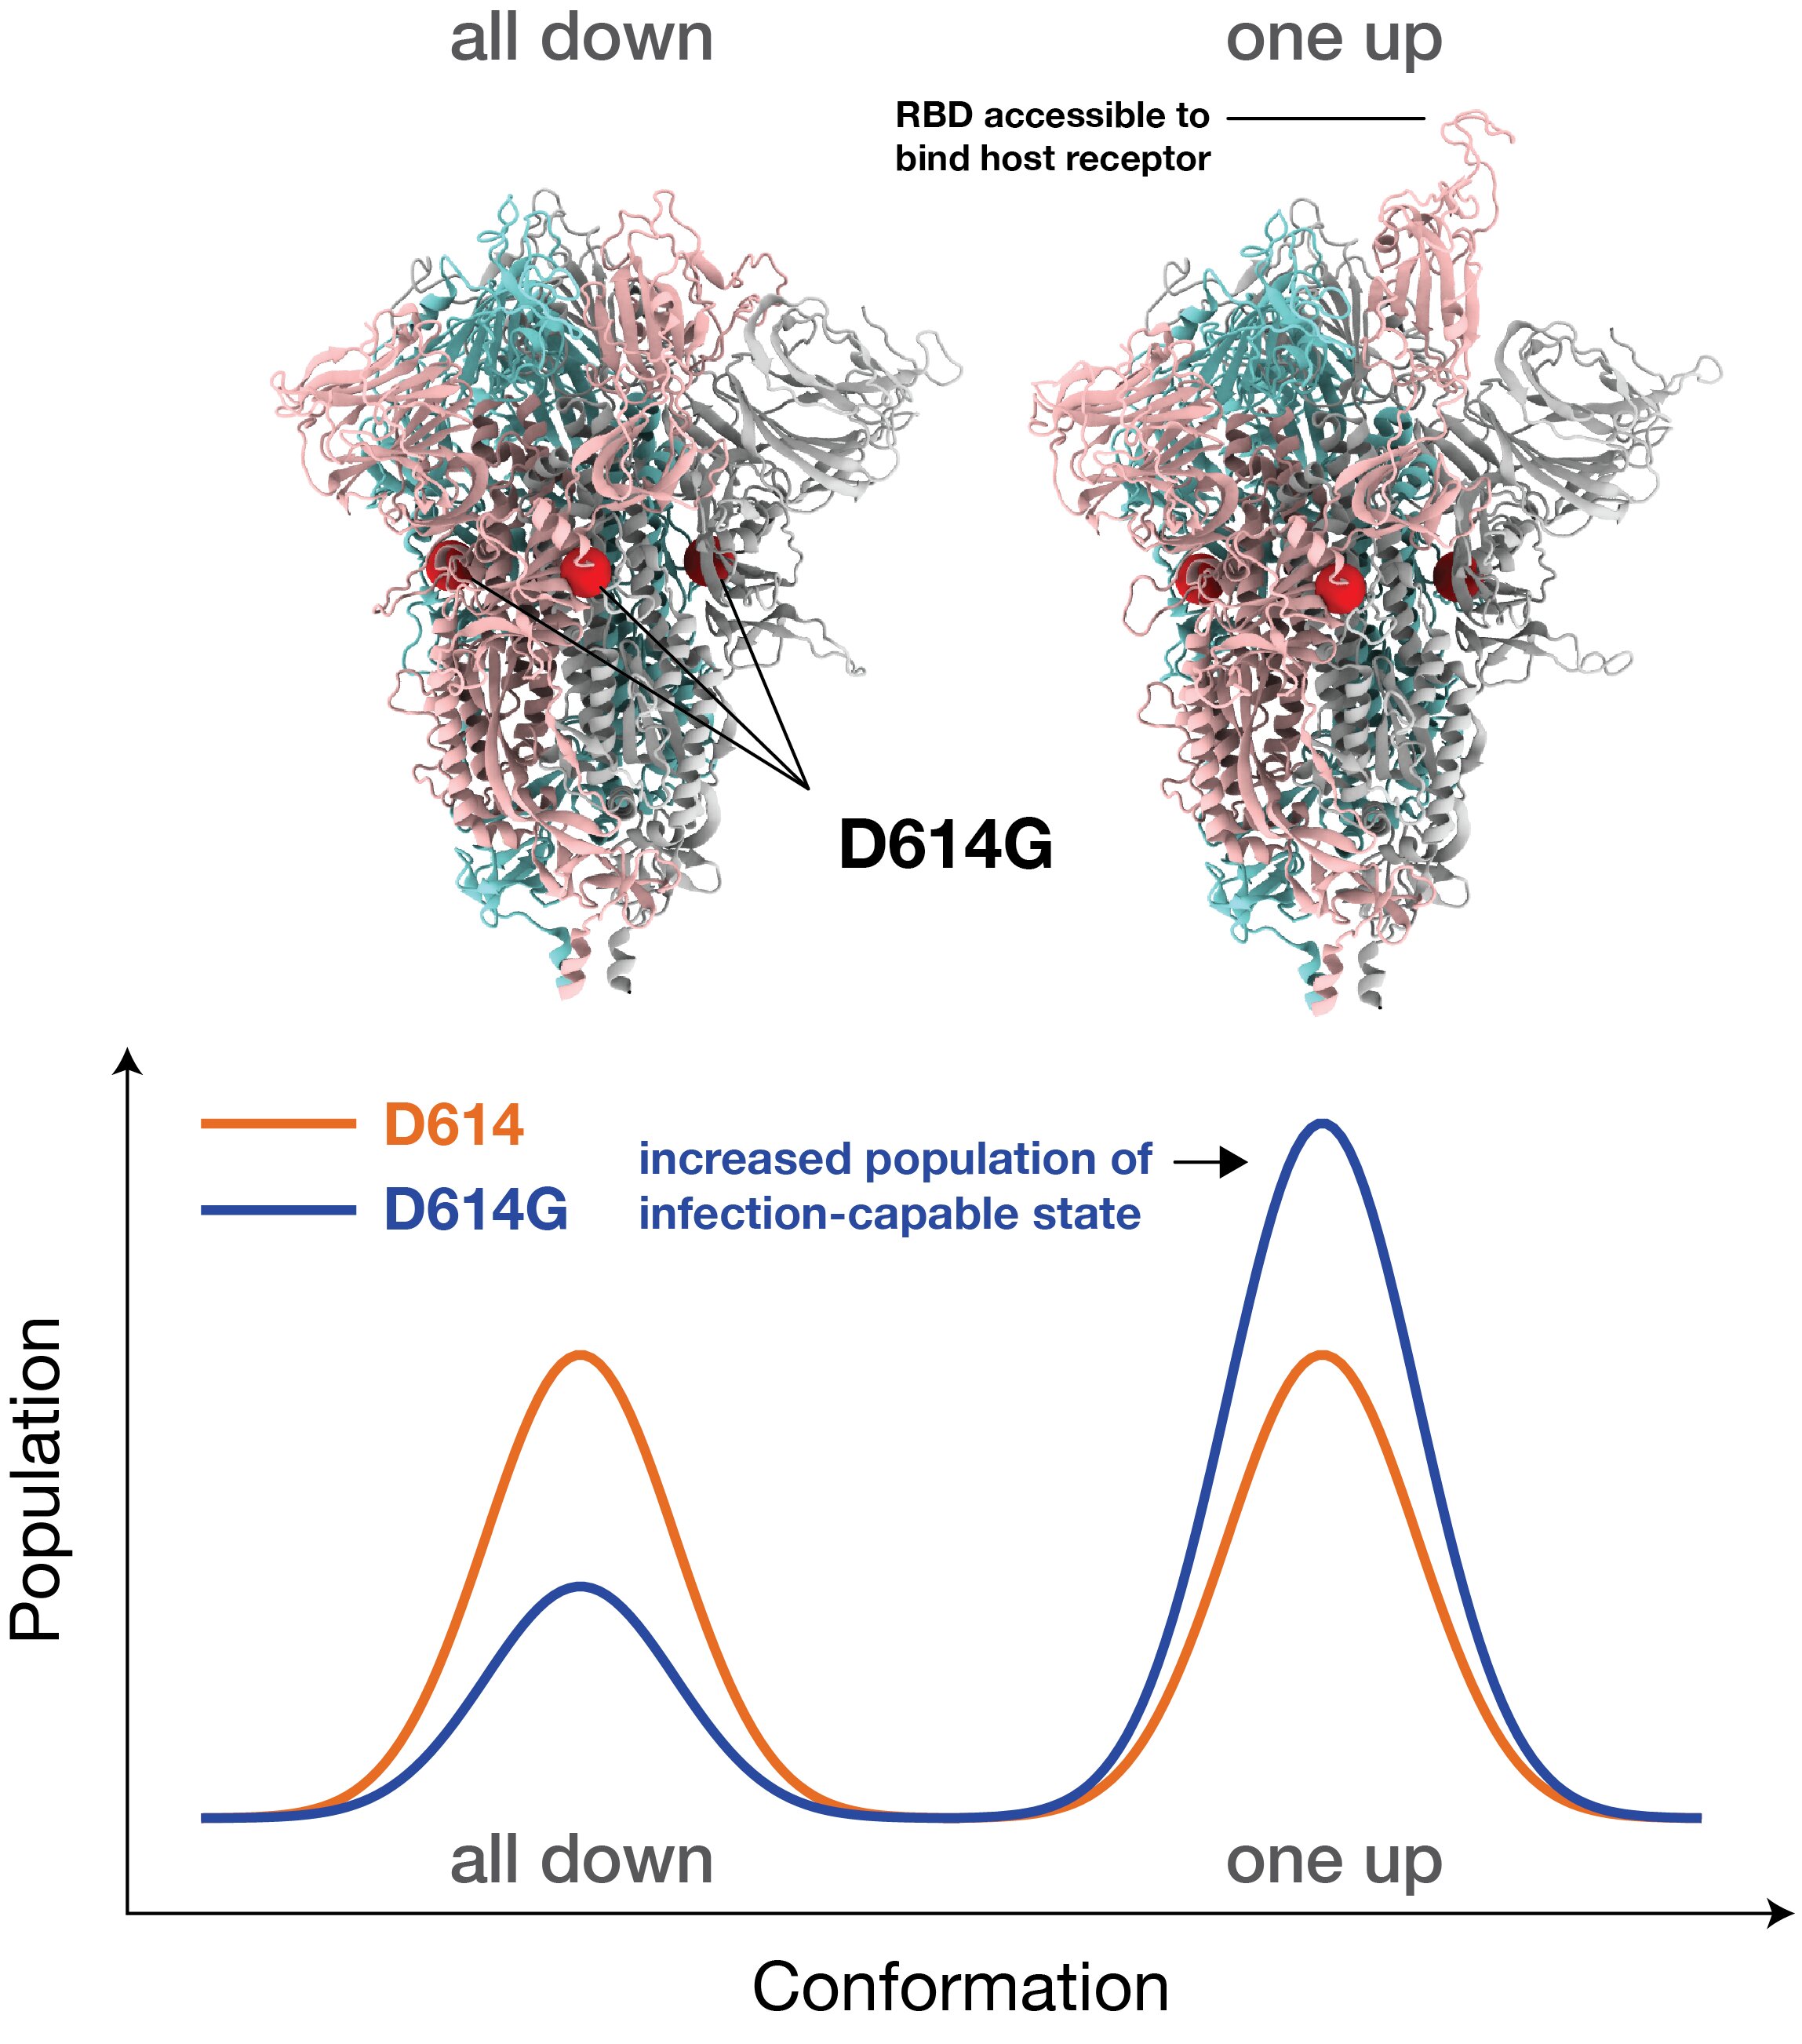 Simulations reveal that the dominant strain of SARS-CoV-2 binds to the host, is subject to antibodies